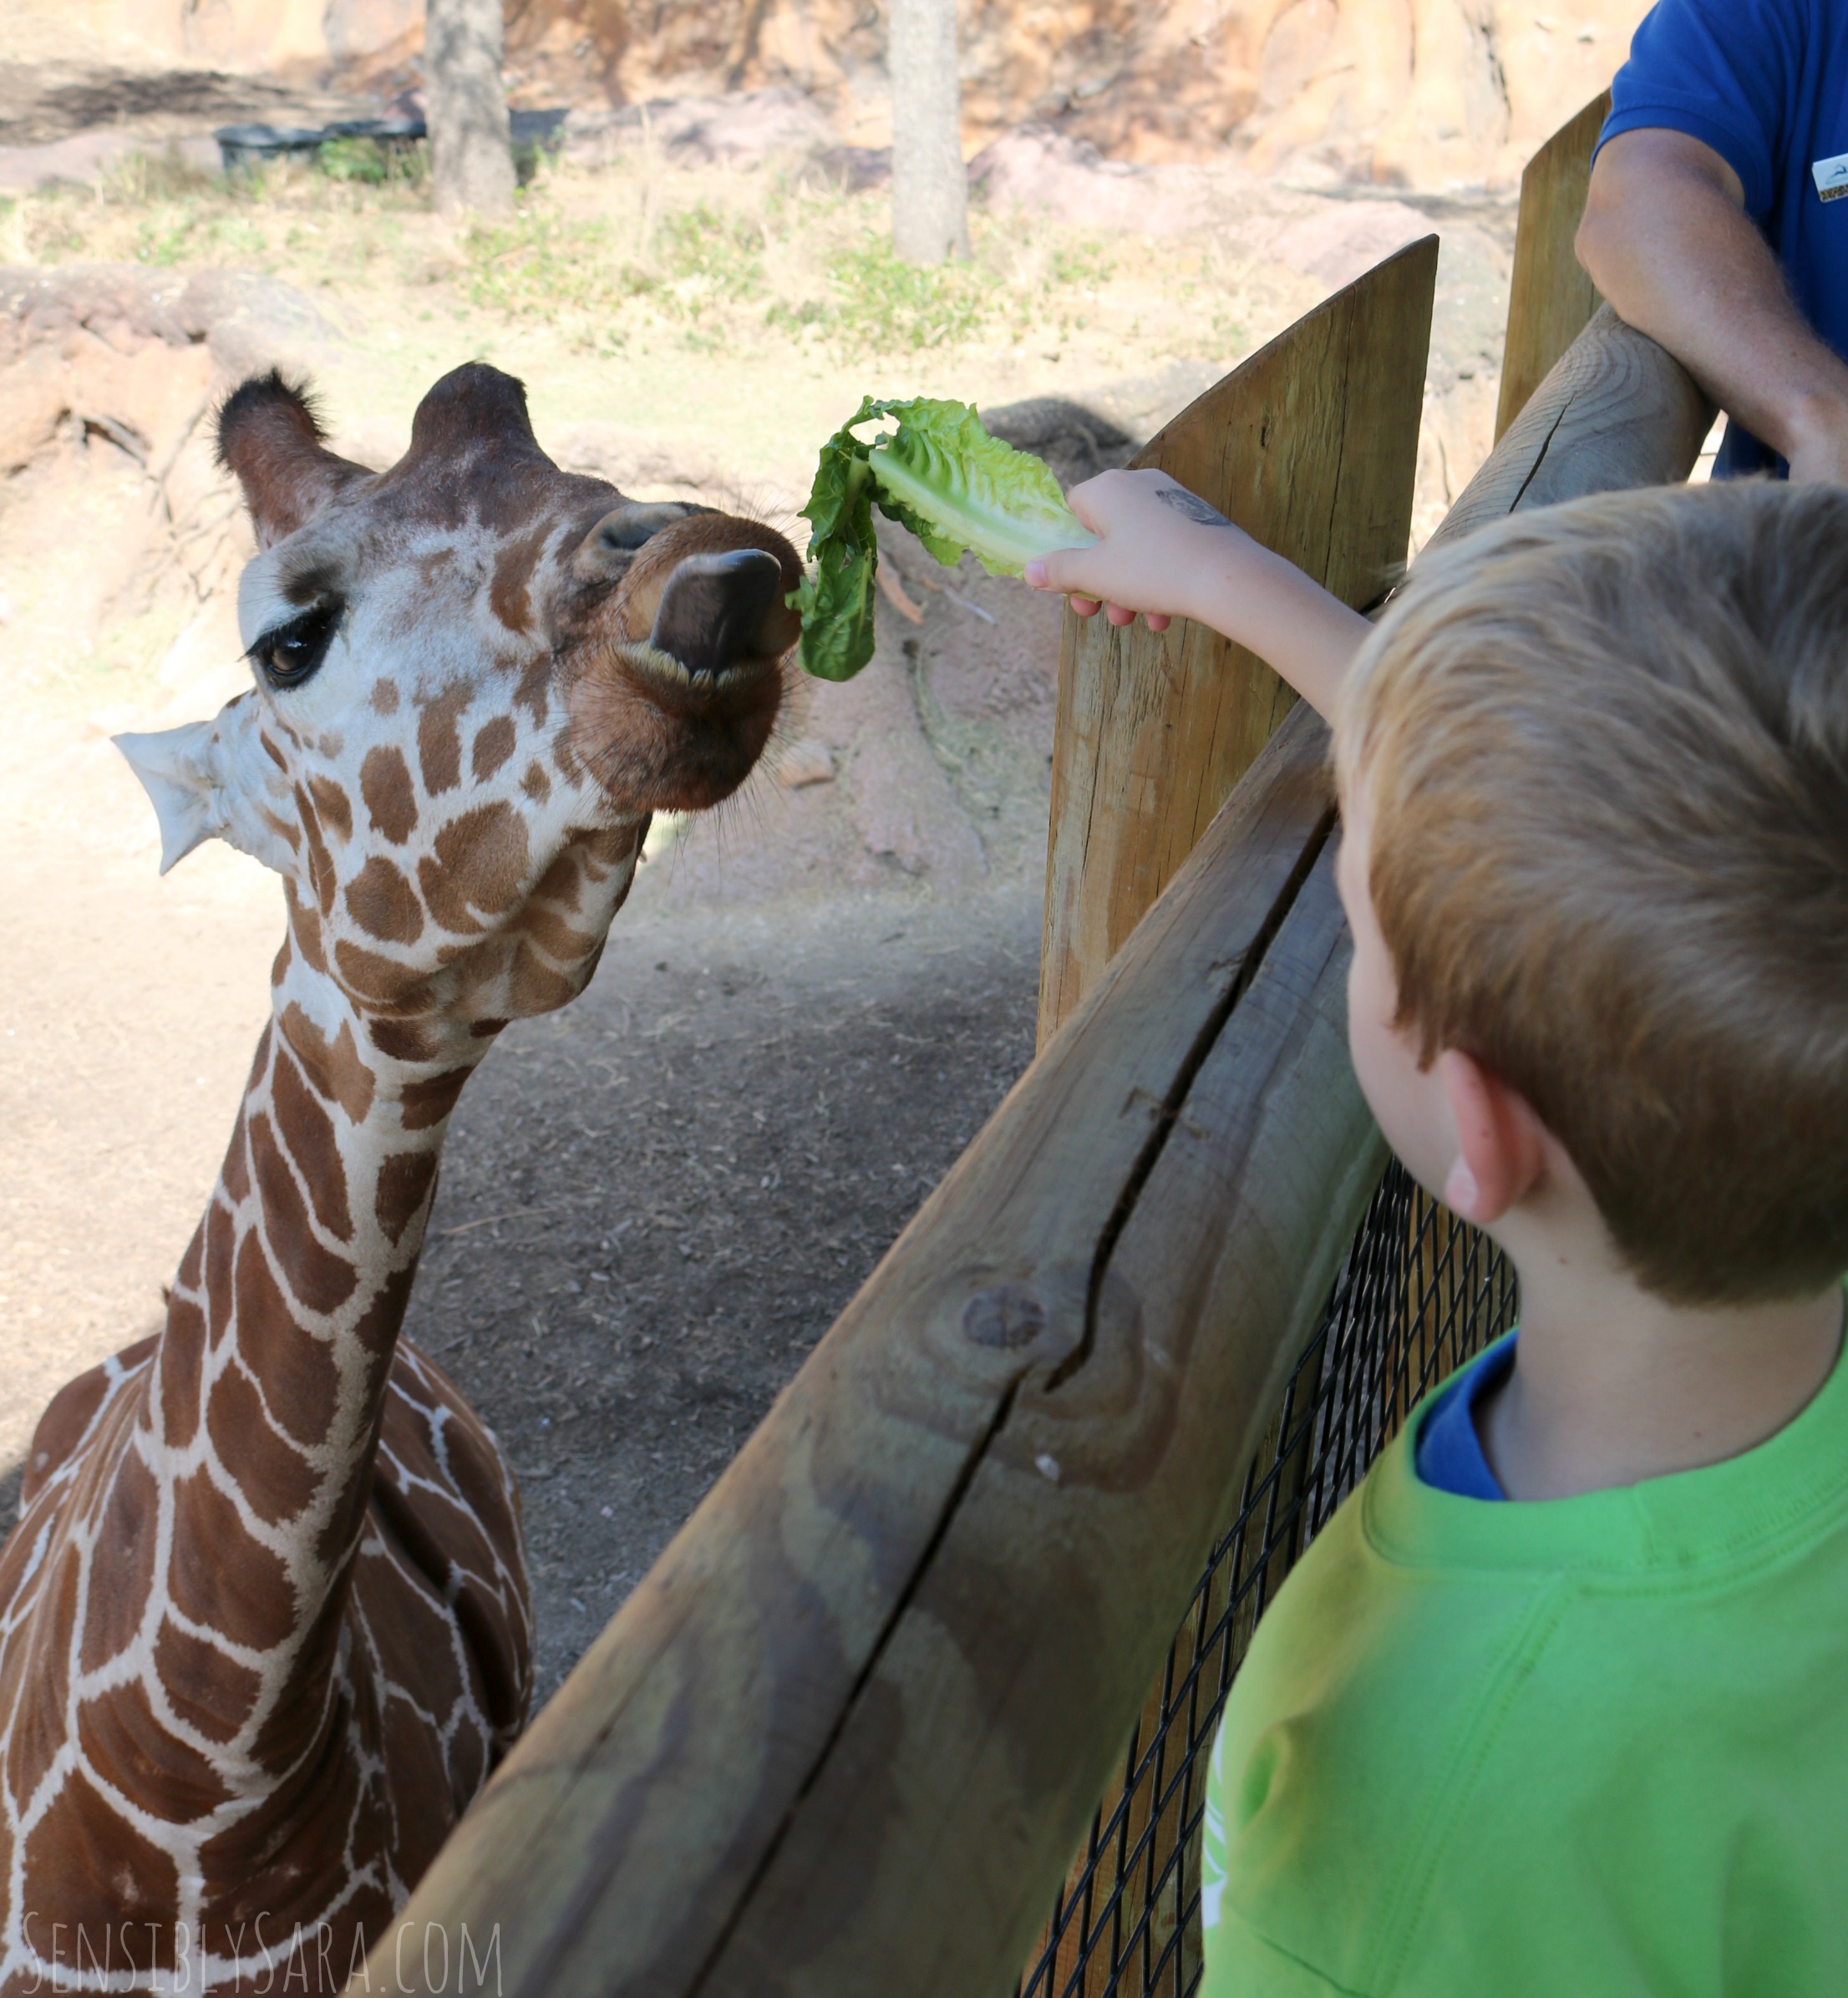 separated dating san antonio zoo hours and prices